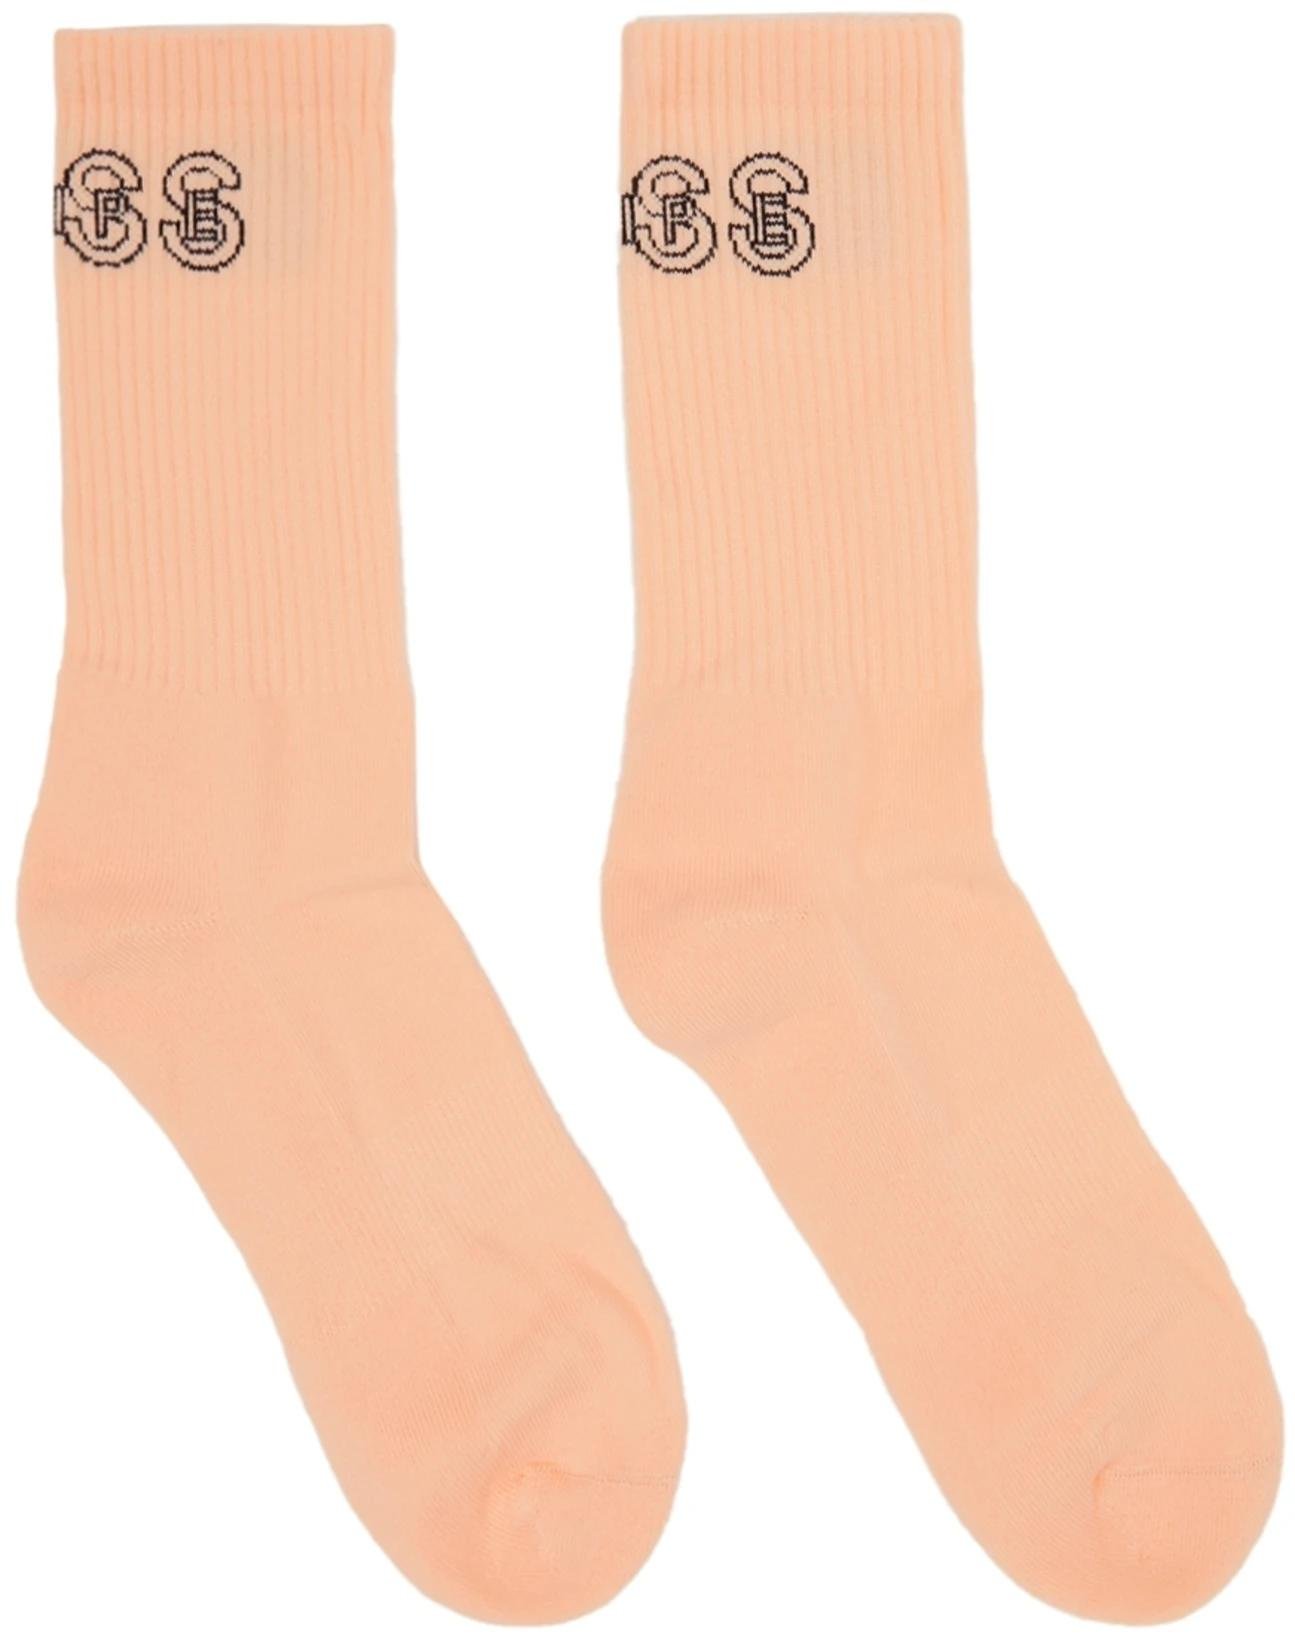 Pink Tennis Socks by BLESS